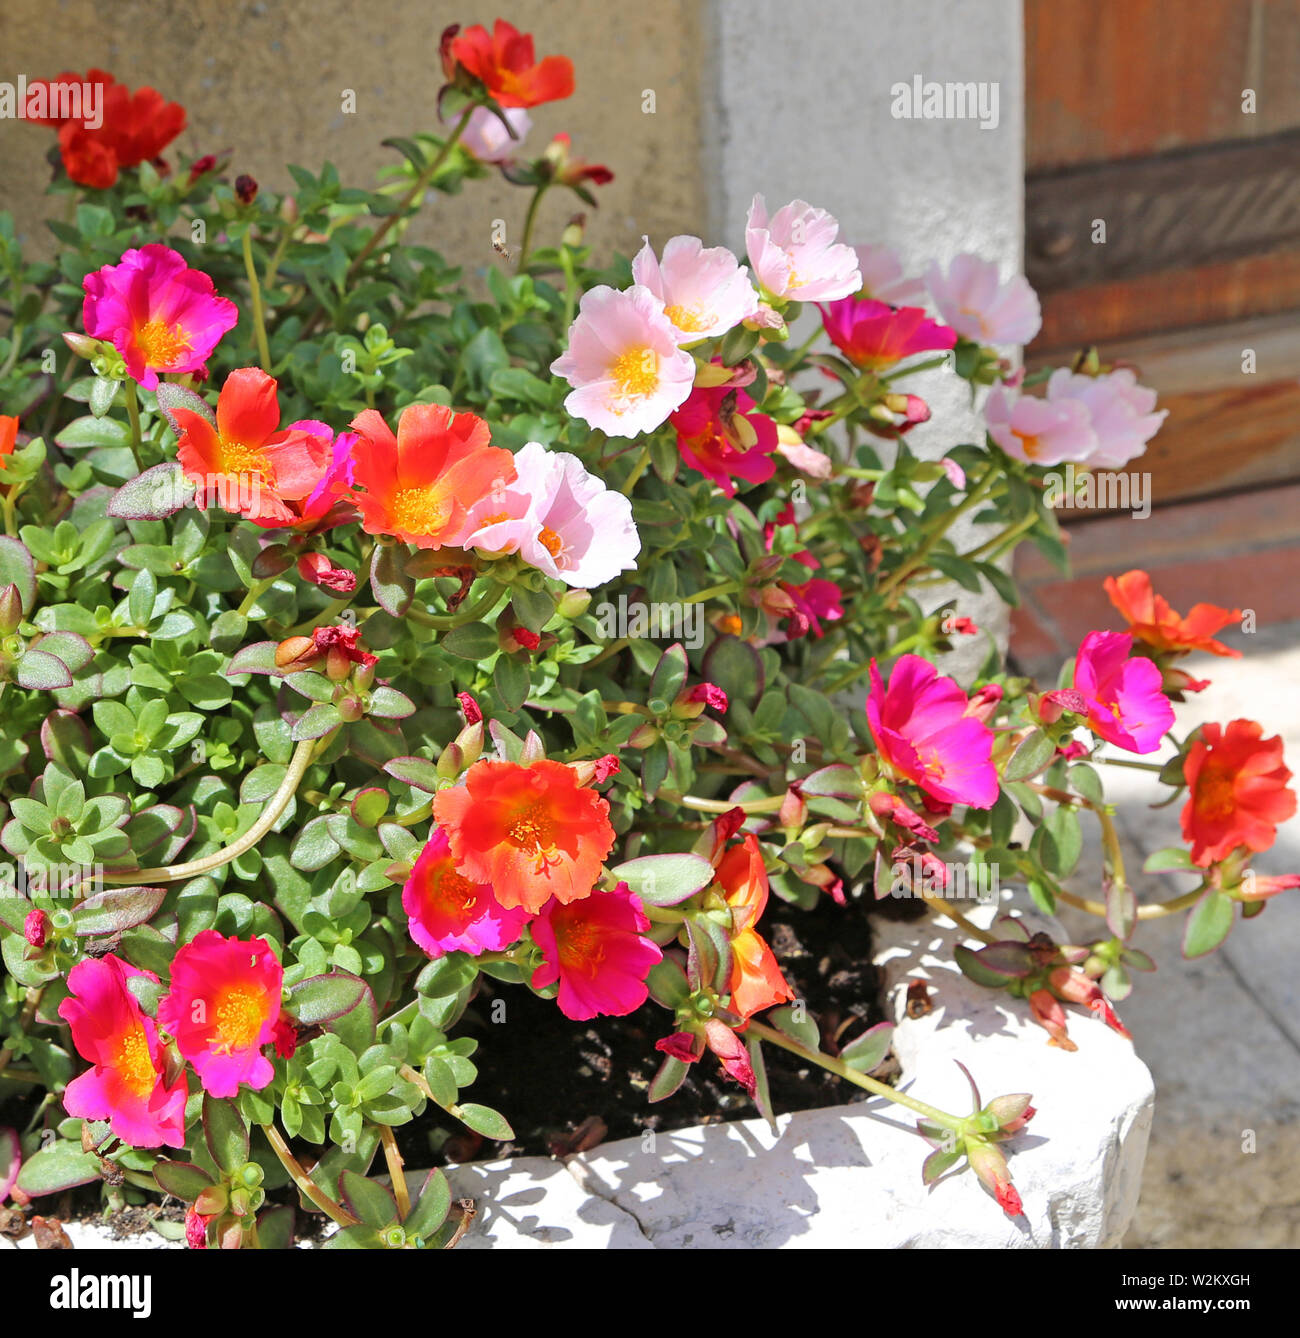 Tropical plant with red and pink flowers and yellow middle, Portulaca oleracea, common purslane, also known as verdolaga, red root or pursley. Stock Photo